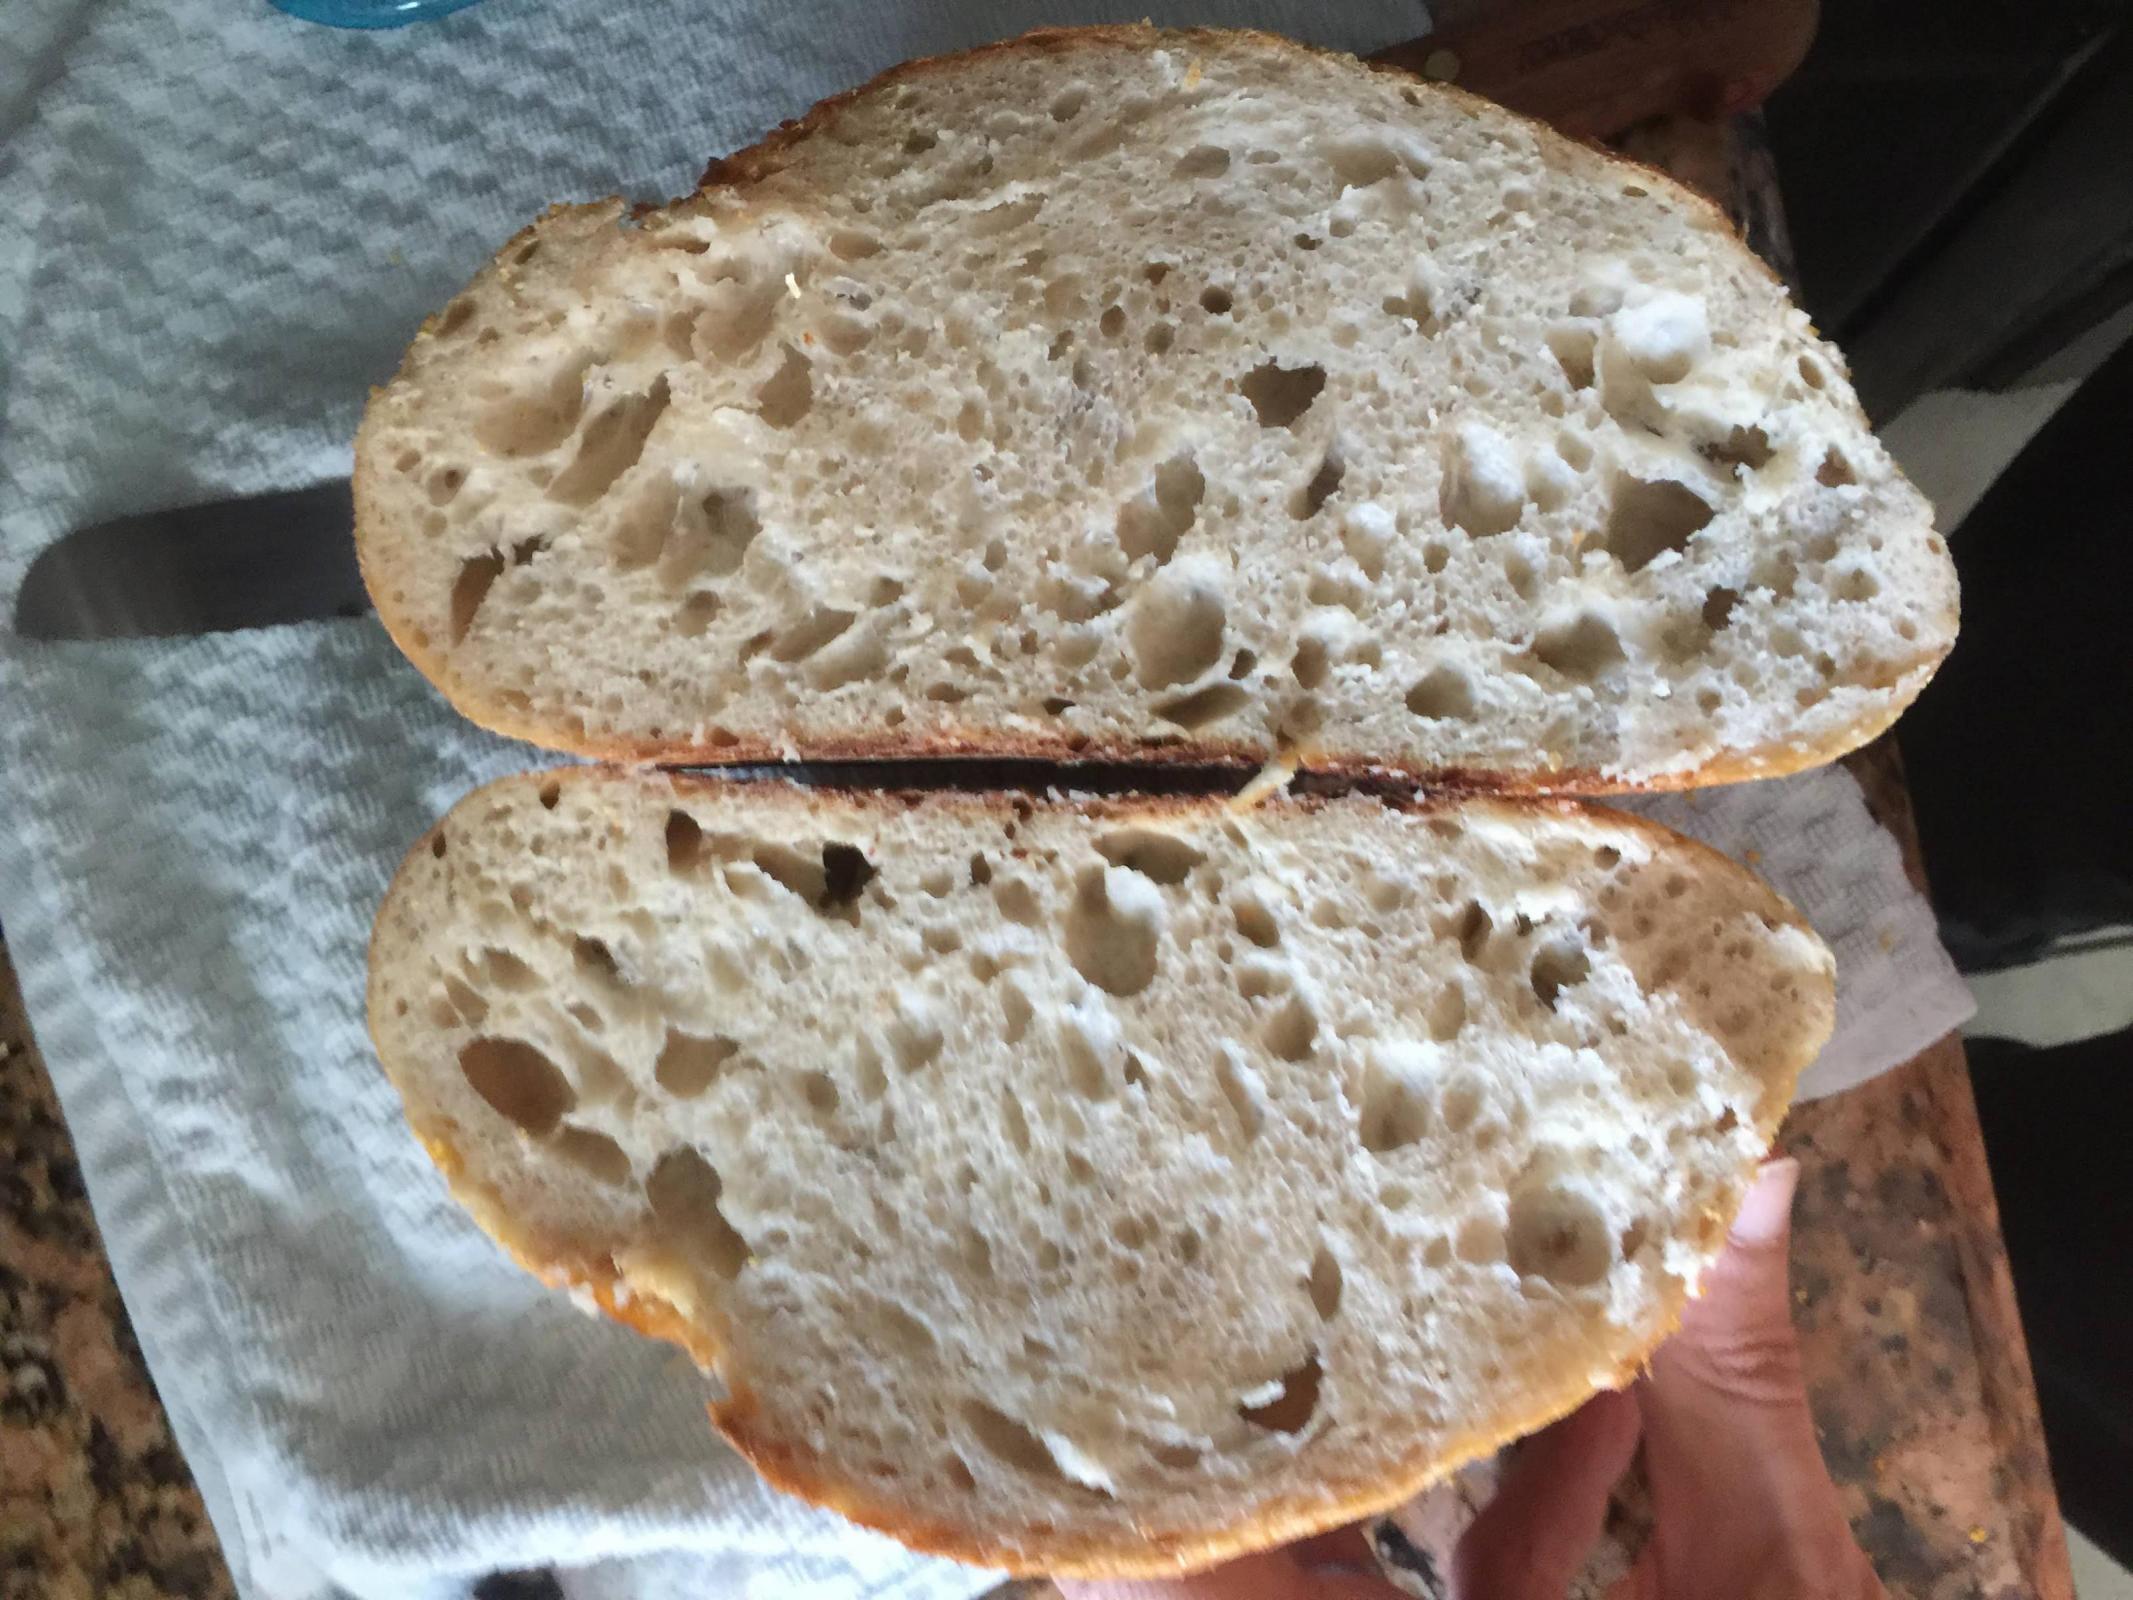 The Crumb in Question